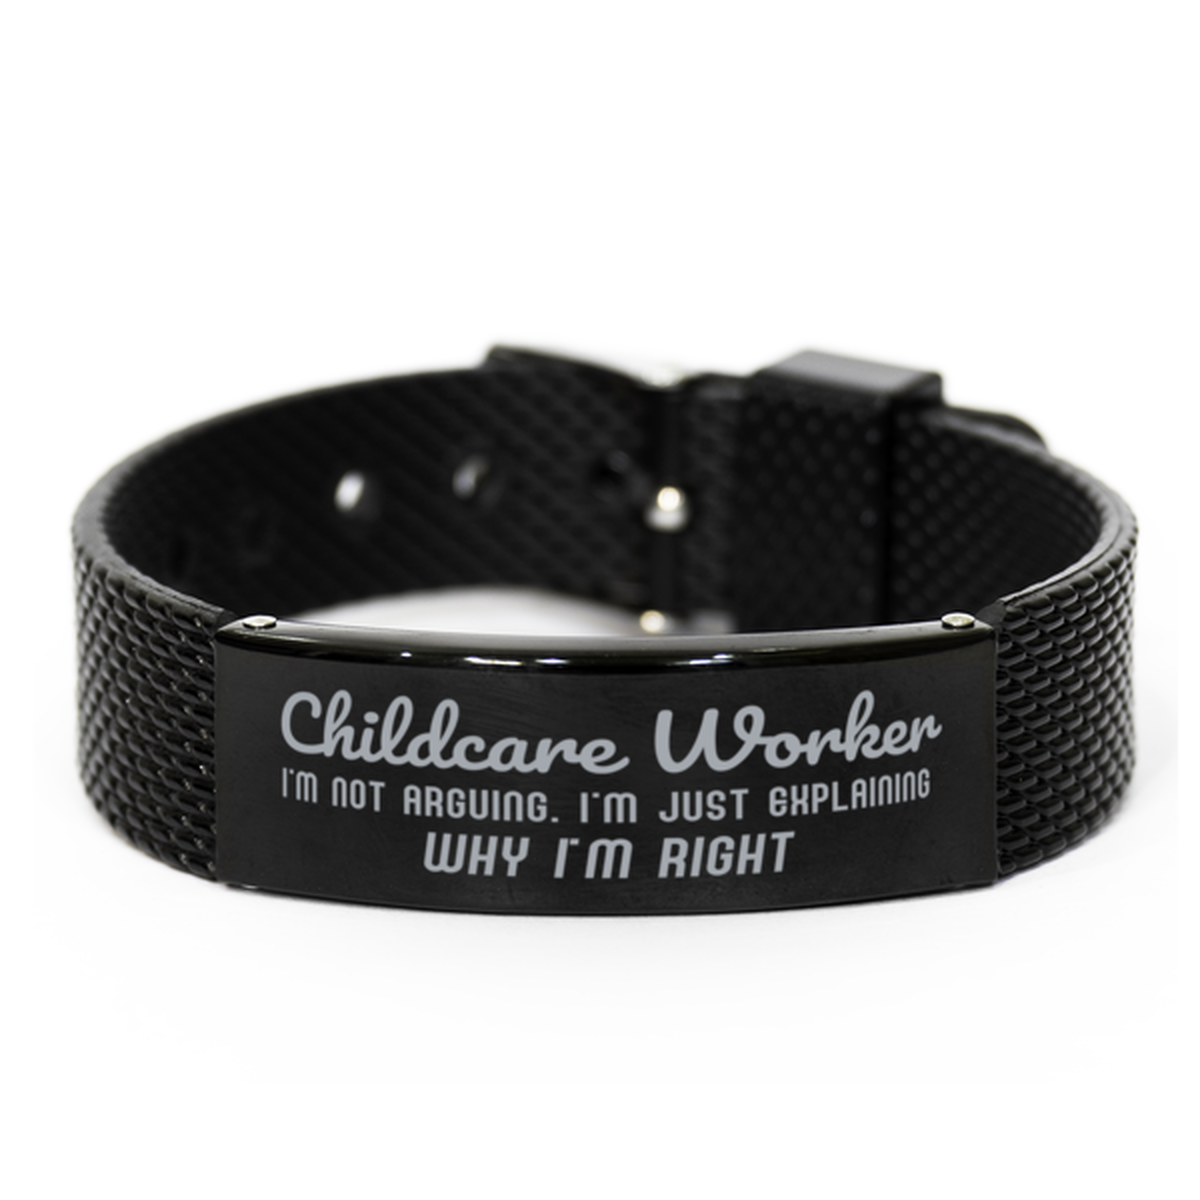 Childcare Worker I'm not Arguing. I'm Just Explaining Why I'm RIGHT Black Shark Mesh Bracelet, Funny Saying Quote Childcare Worker Gifts For Childcare Worker Graduation Birthday Christmas Gifts for Men Women Coworker